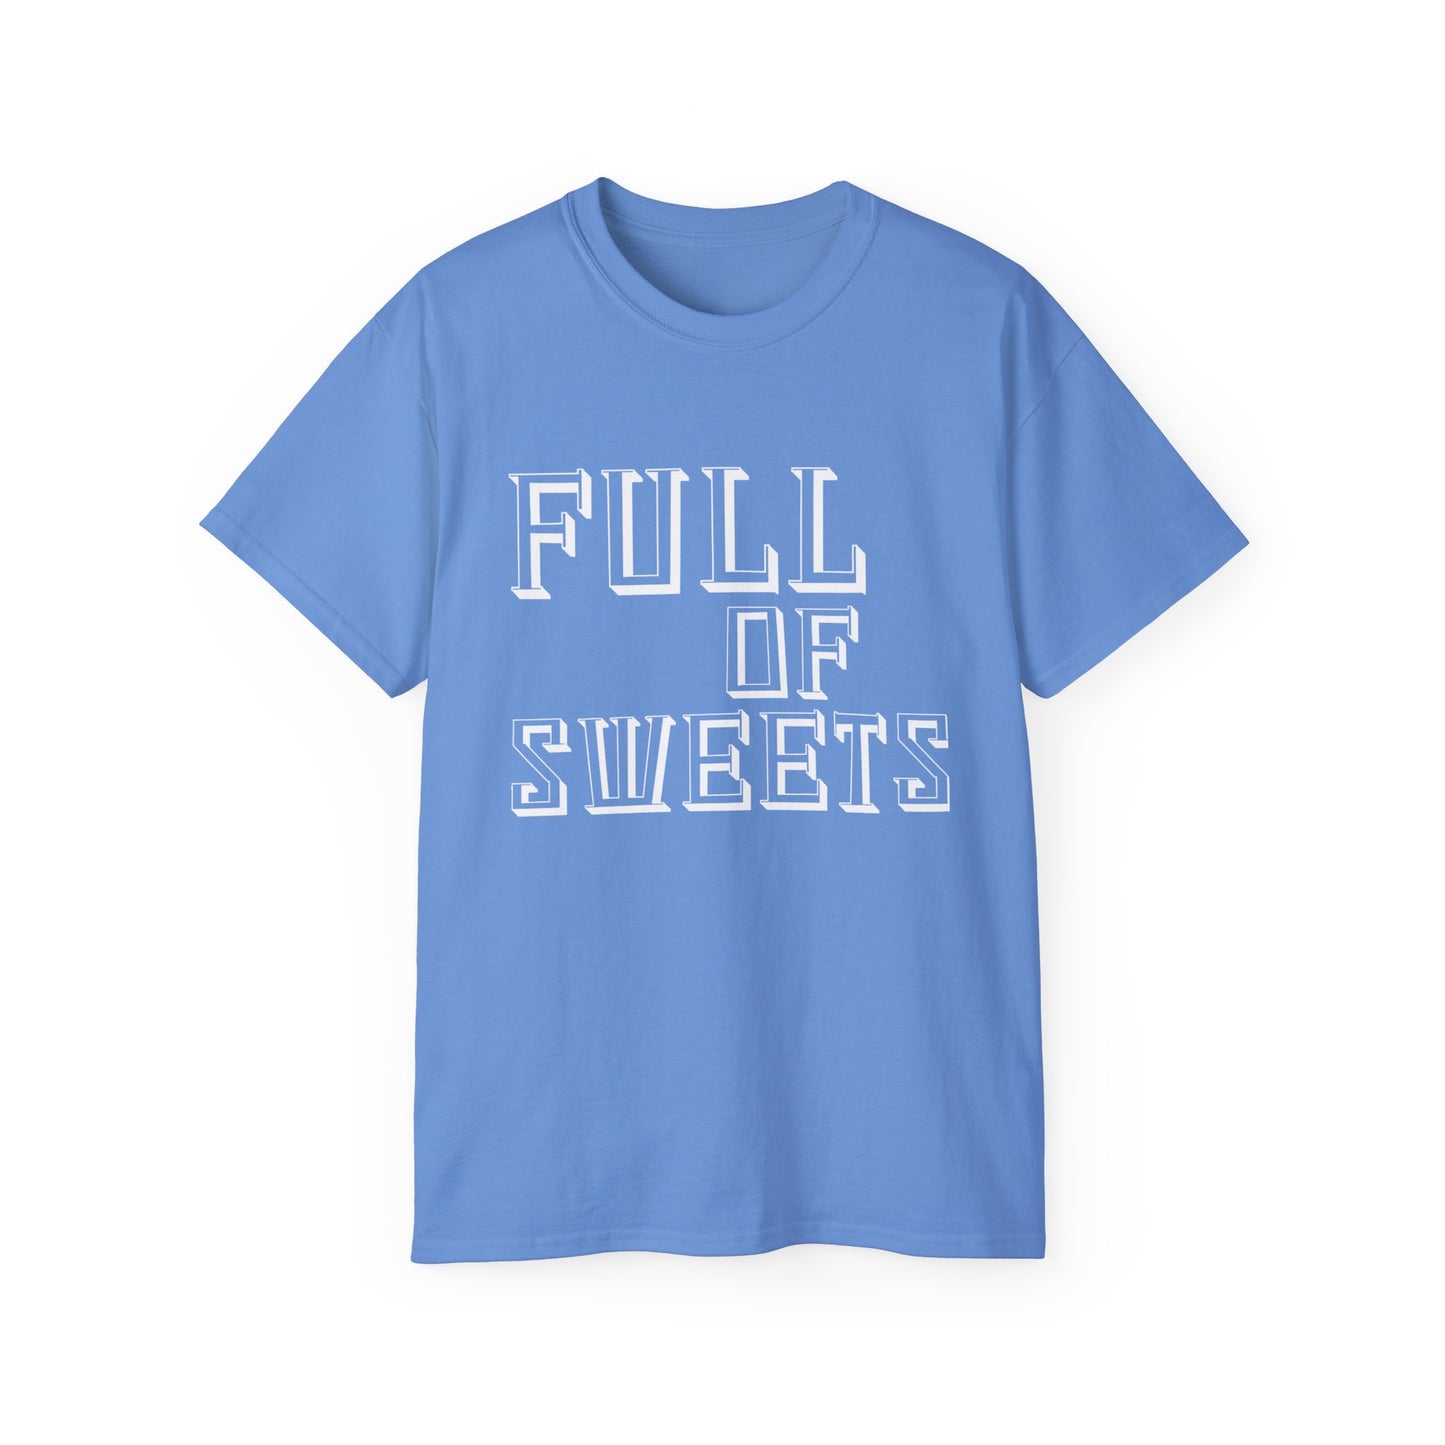 Full of Sweets - Unisex Ultra Cotton Tee